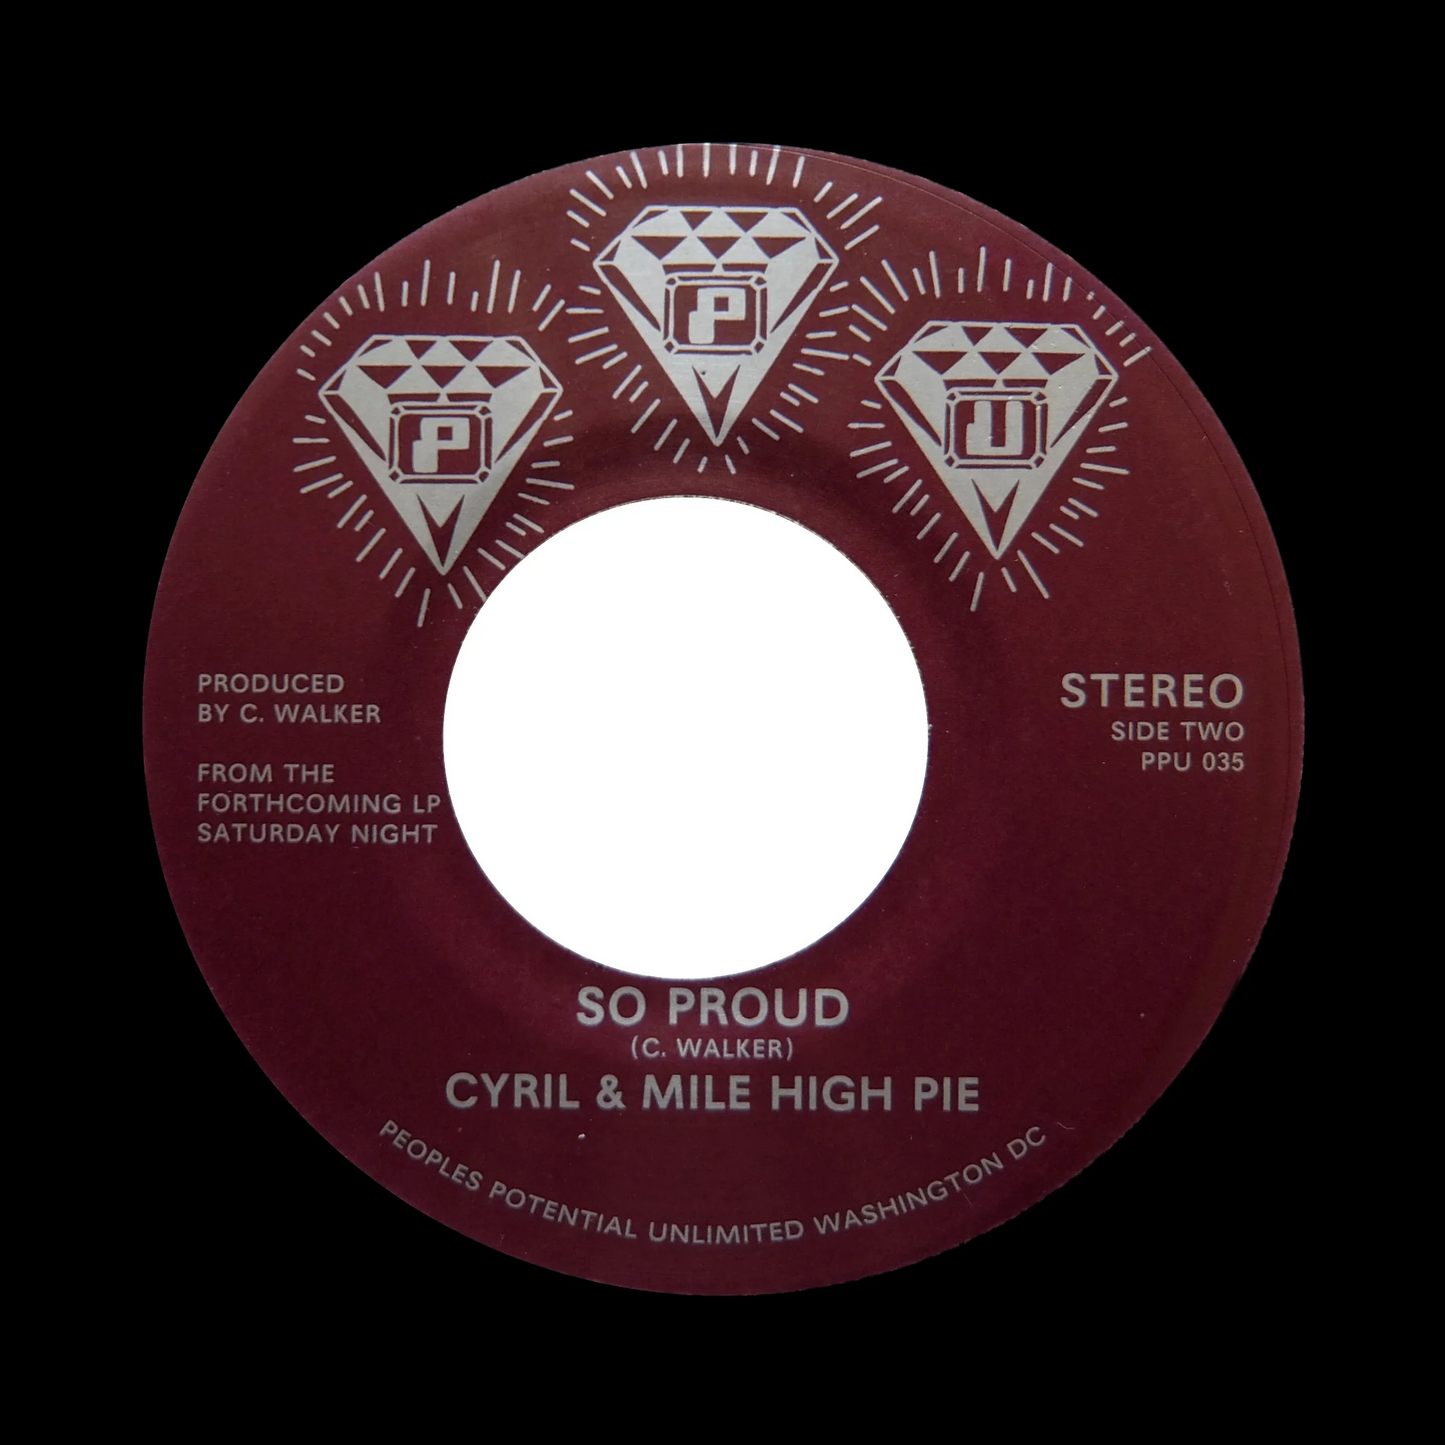 CYRIL FEAT. MARCEL EVANS & MILE HIGH PIE - WILL YOU SHOW UP(7)